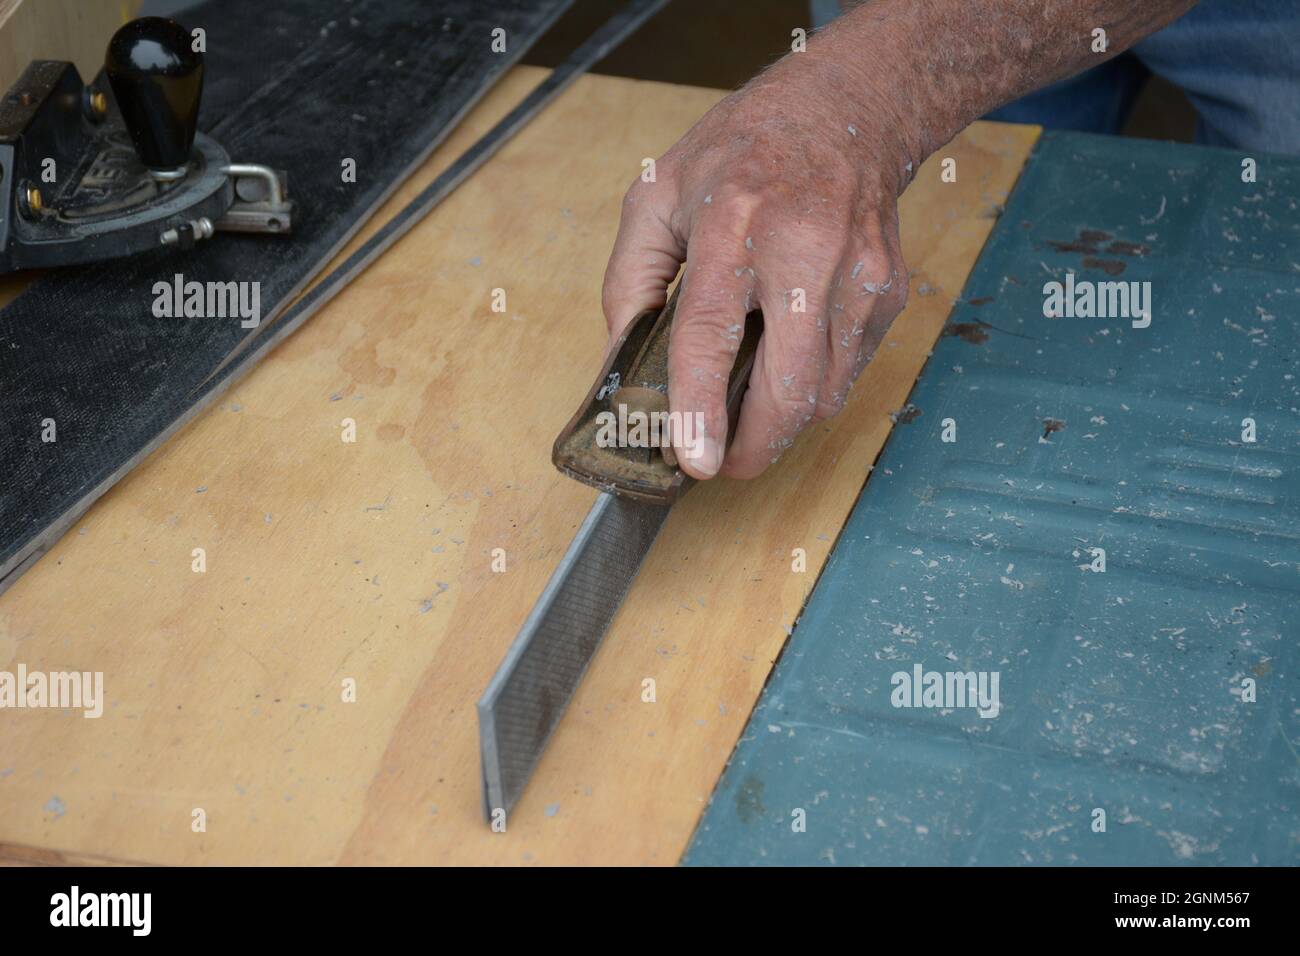 Do It Yourself senior men and Home owners cutting an preparing laminate flooring for their home using saws, planes and other tools which are dangerous Stock Photo